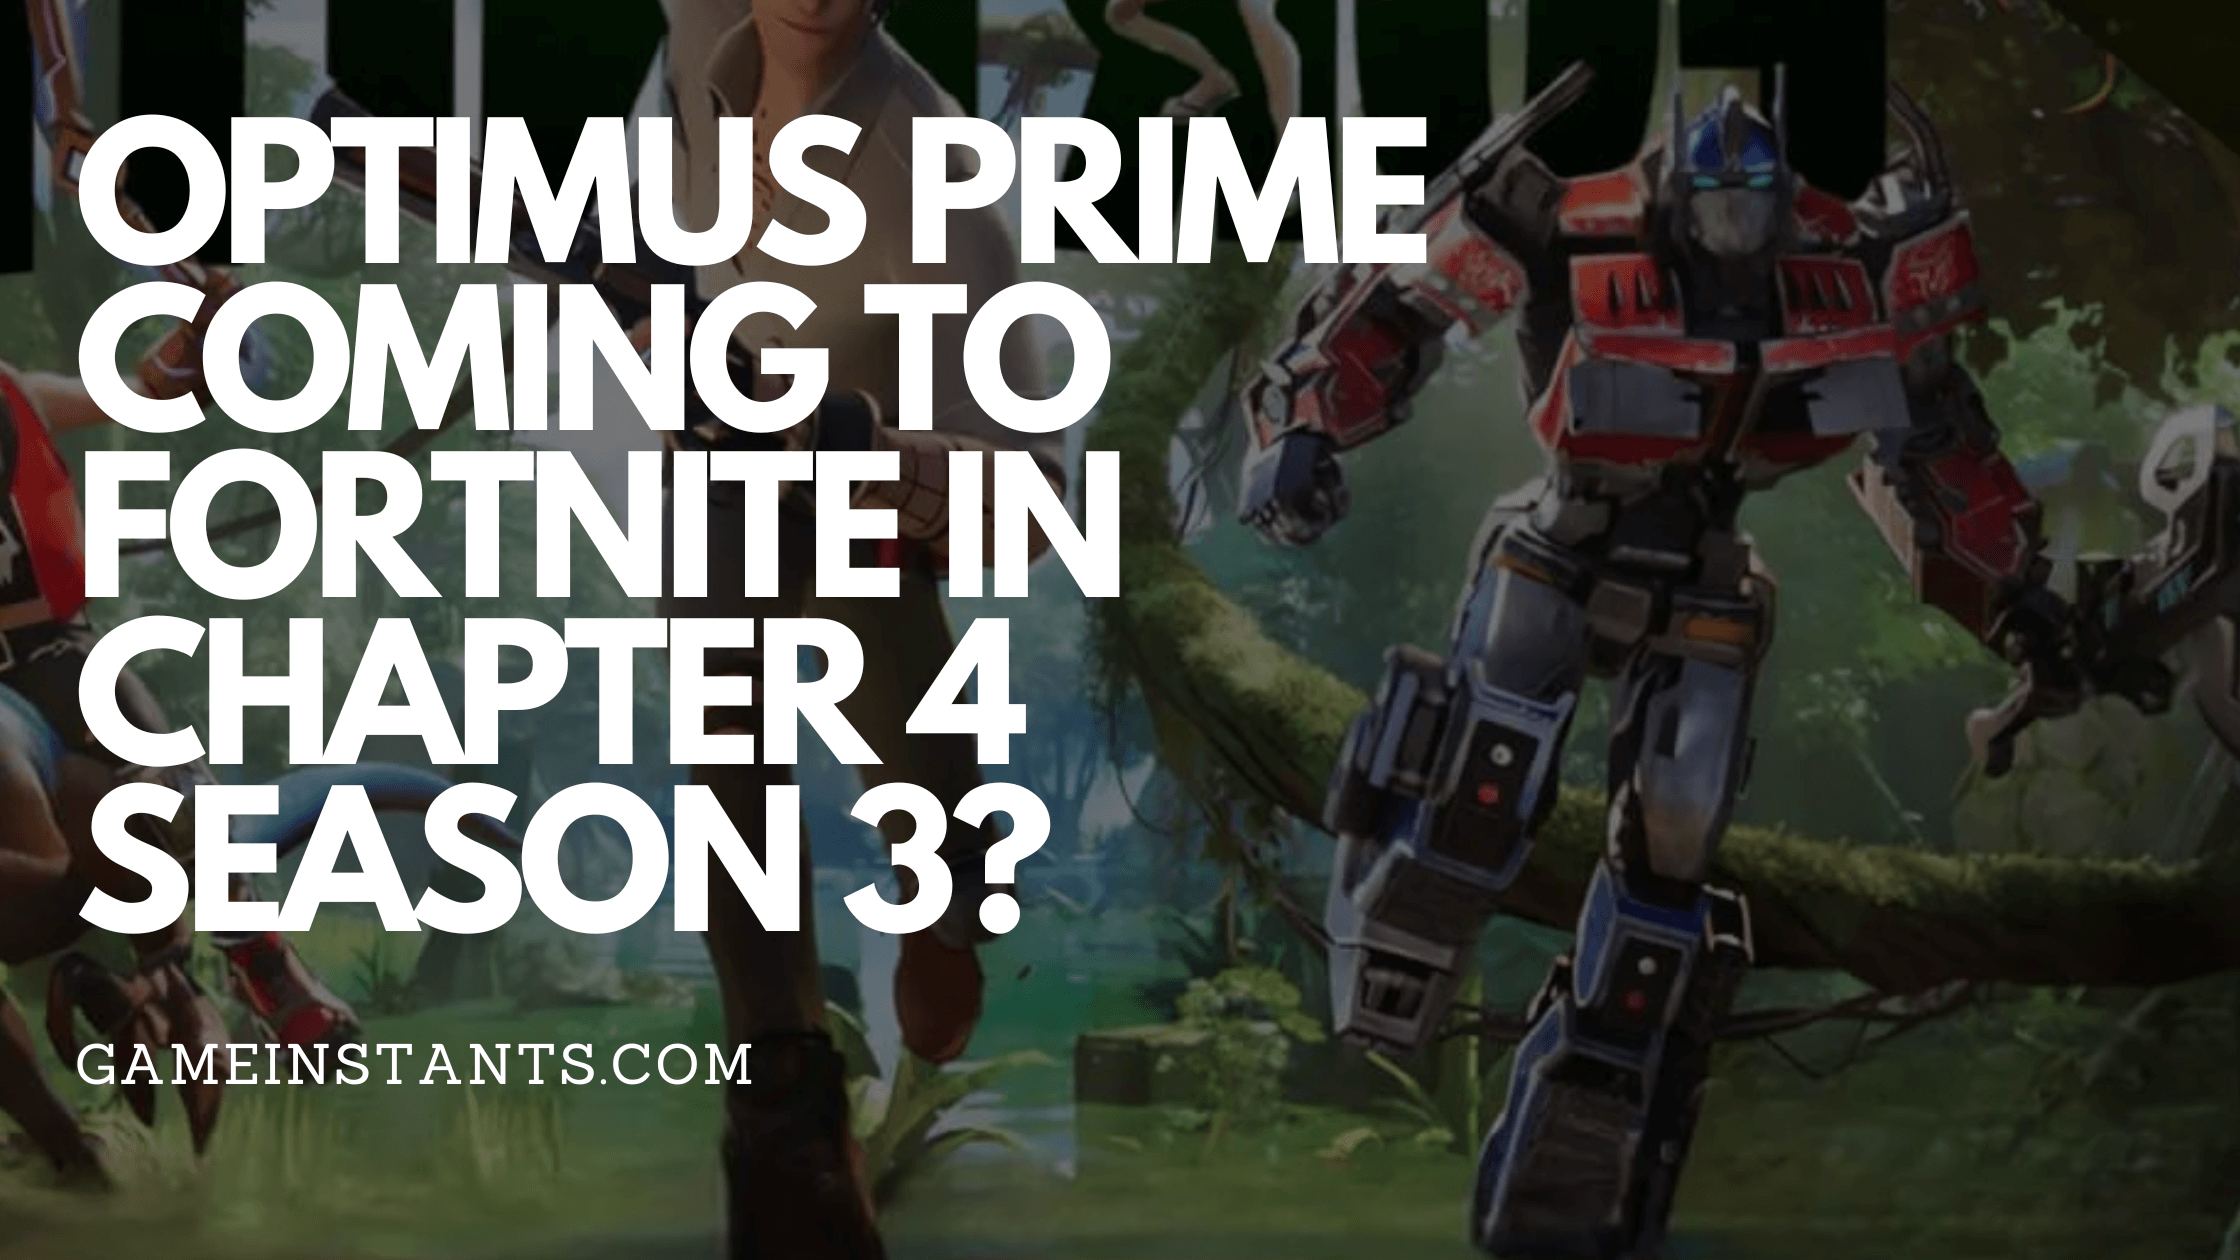 Optimus Prime Coming To Fortnite in Chapter 4 Season 3